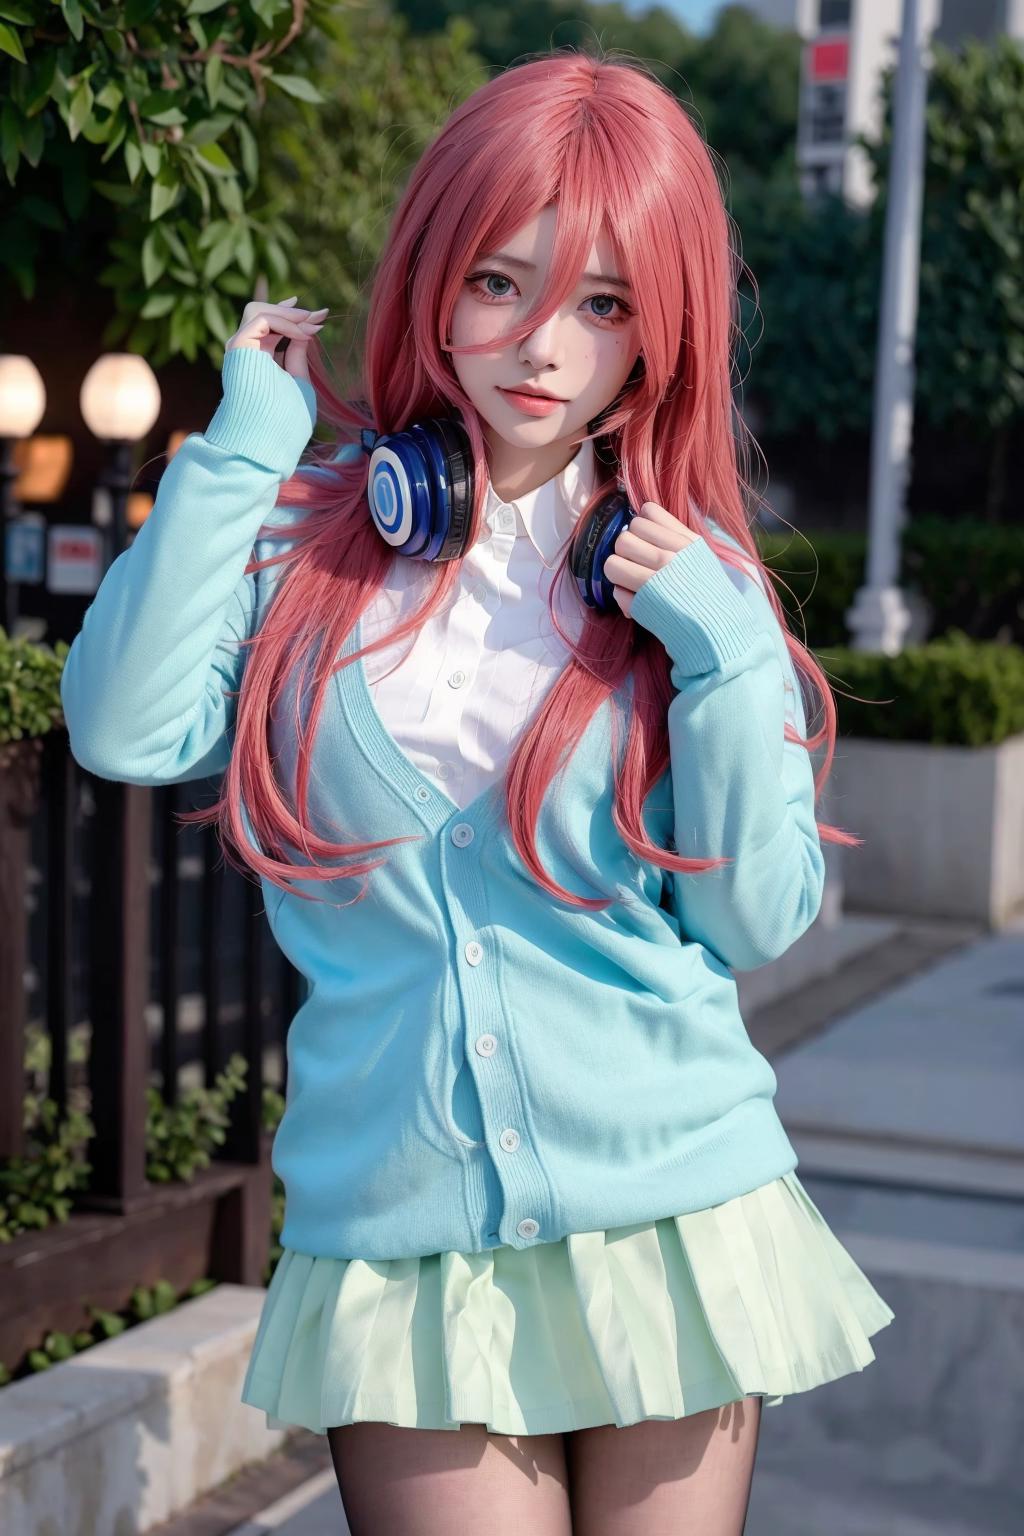 Nakano Miku in The Quintessential Quintuplets | Realistic LORA image by jappww